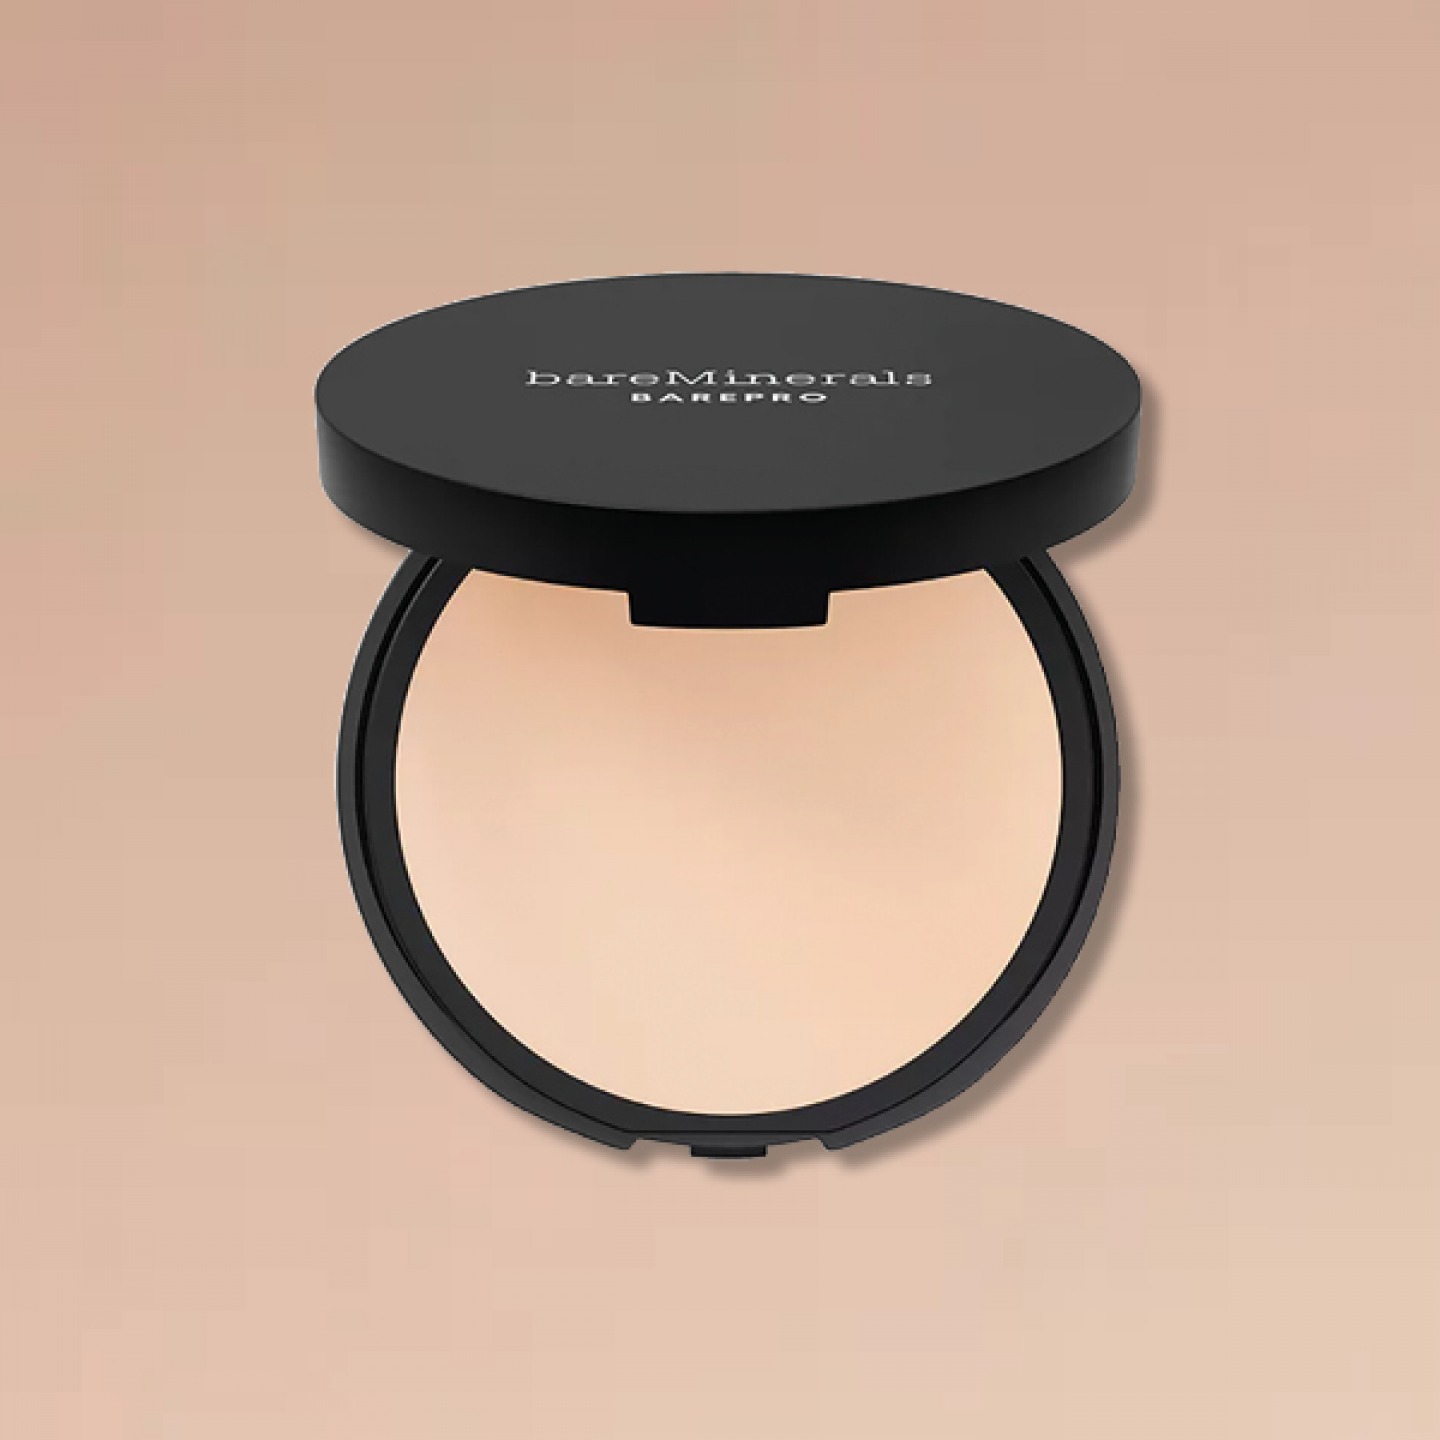 The Best New Foundations That'll Give You a Flawless Finish